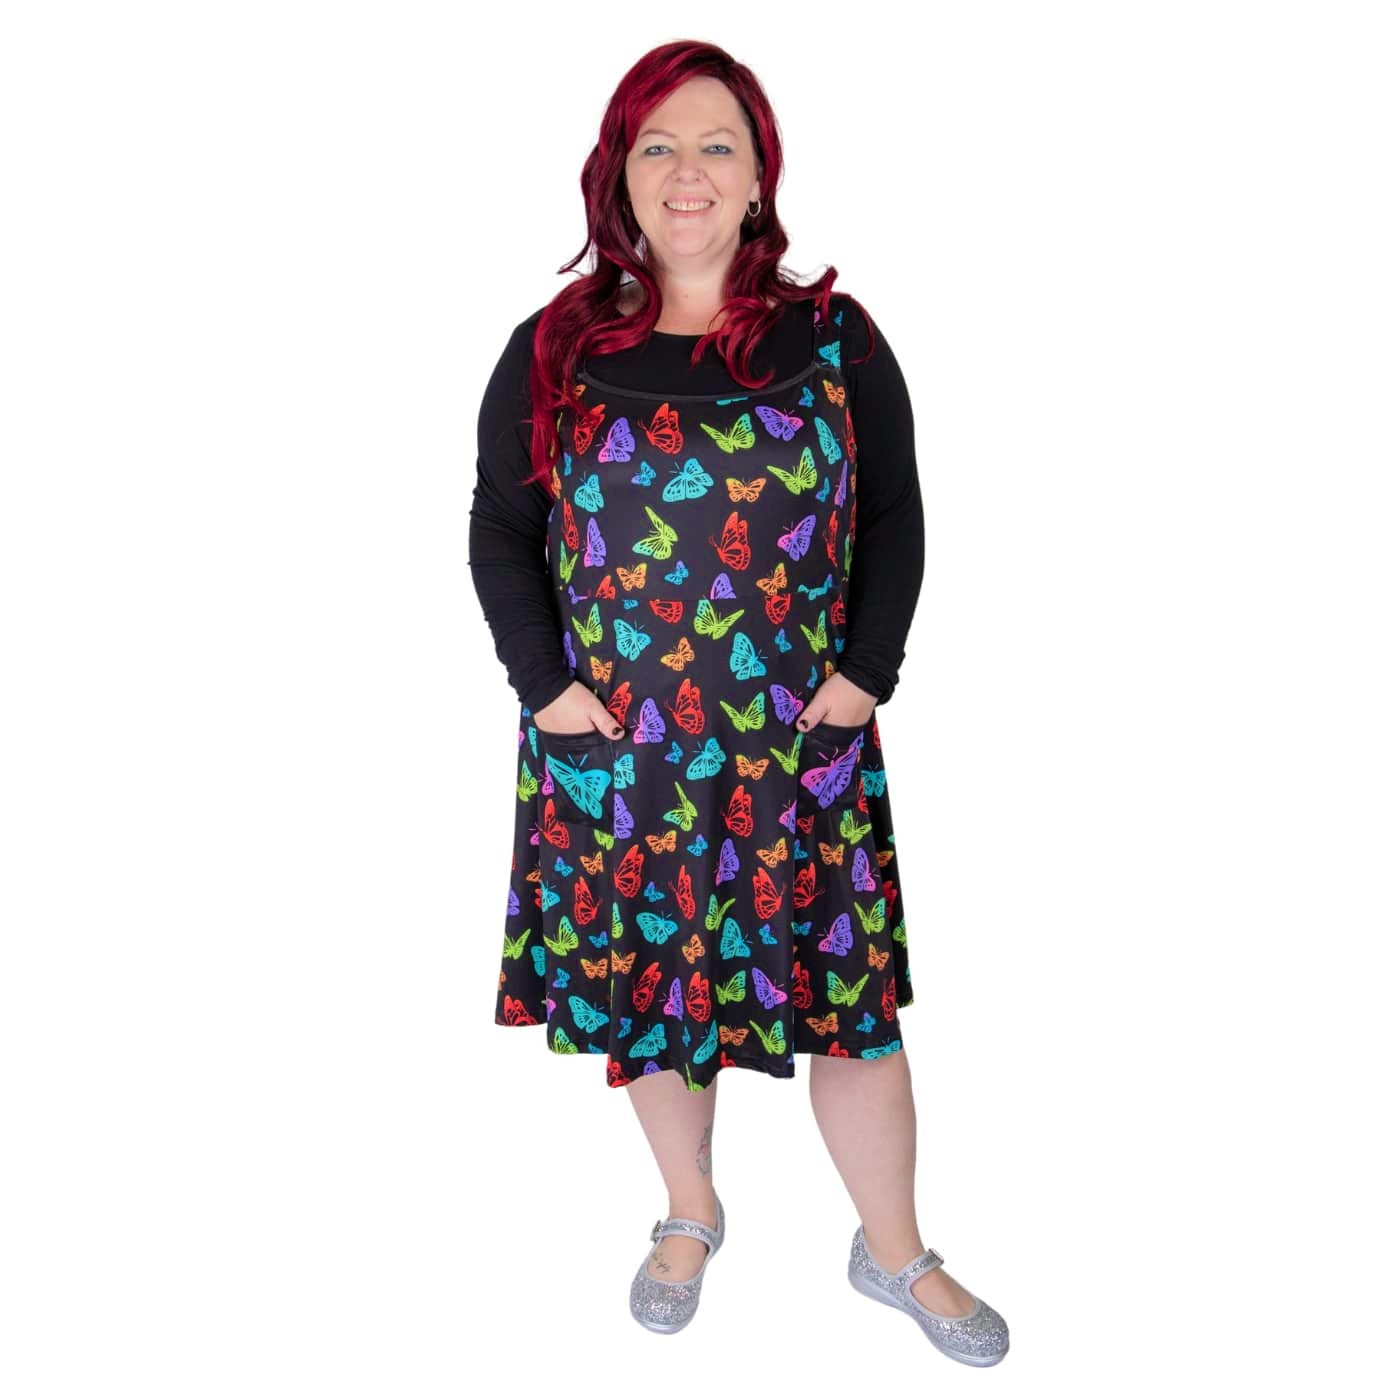 Kaleidoscope Pinafore by RainbowsAndFairies.com.au (Monarch Butterfly - Butterflies - Dress With Pockets - Pinny - Rainbow - Vintage Inspired - Kitsch) - SKU: CL_PFORE_KSCOP_ORG - Pic-03